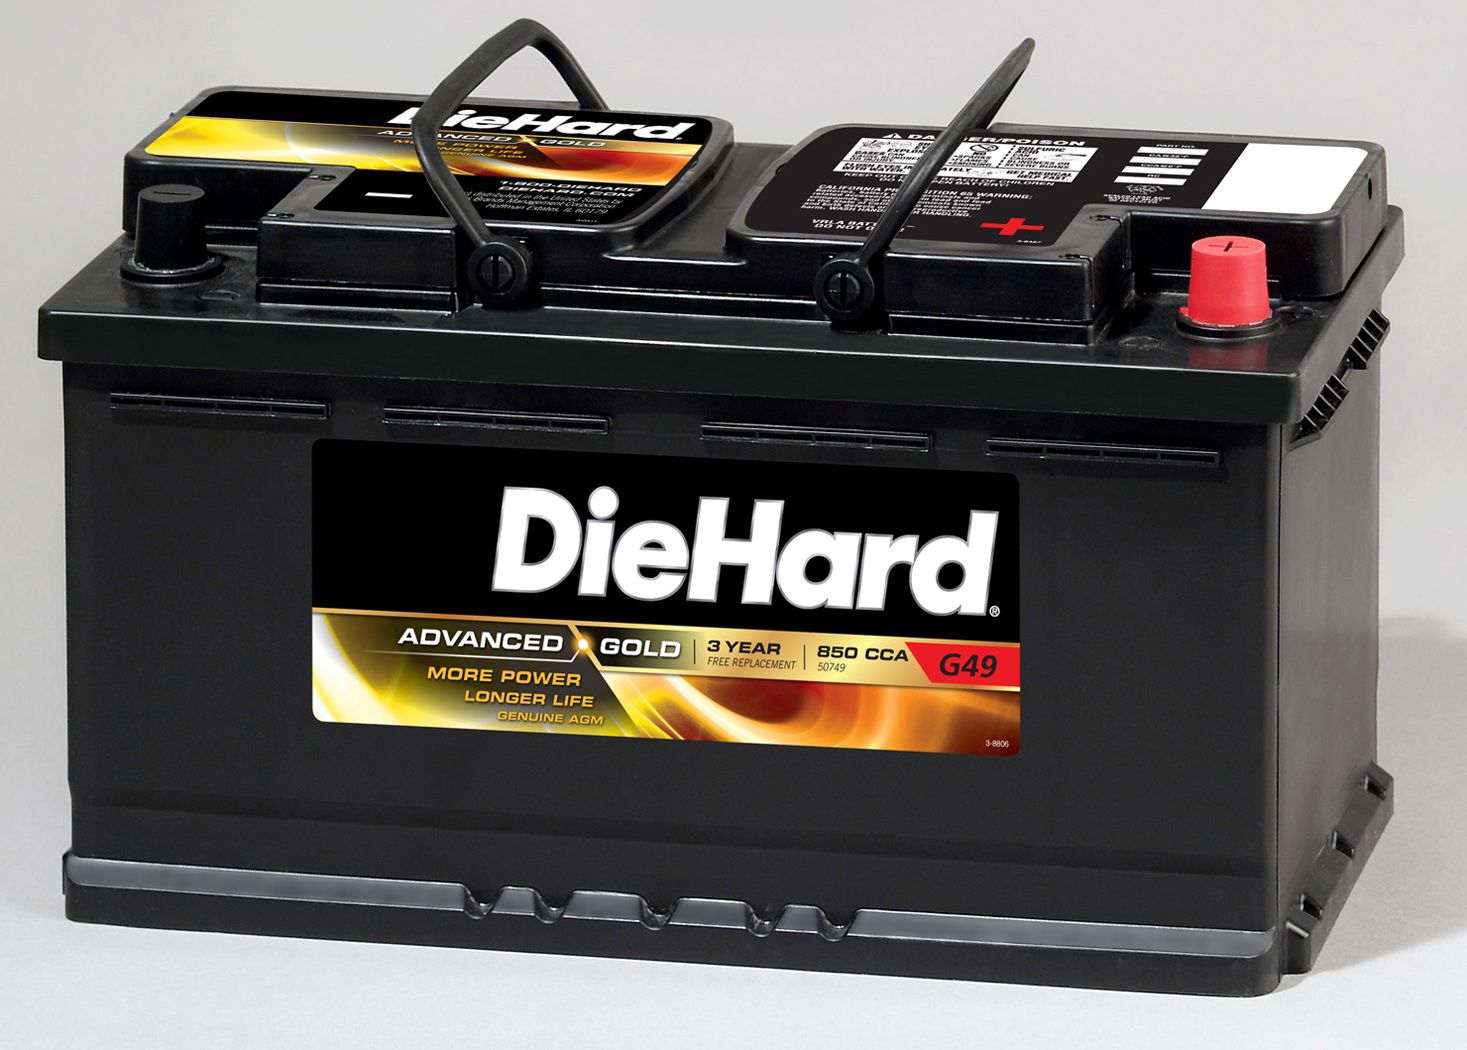 DieHard Gold AGM Automotive Battery - Group Size EP-49 (Price with Exchange)